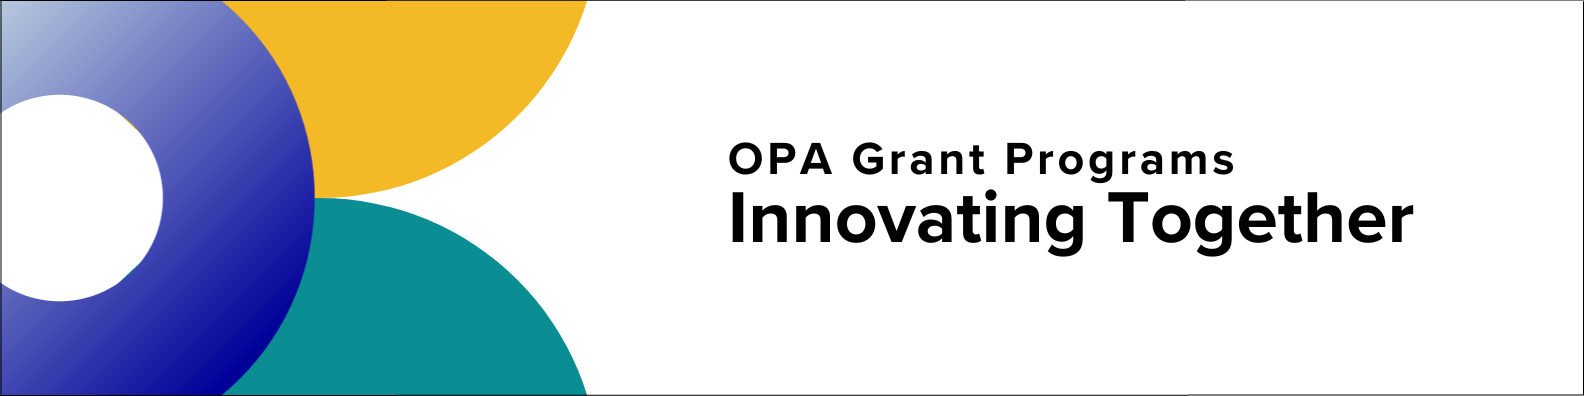 OPA Grant Programs: Innovating Together